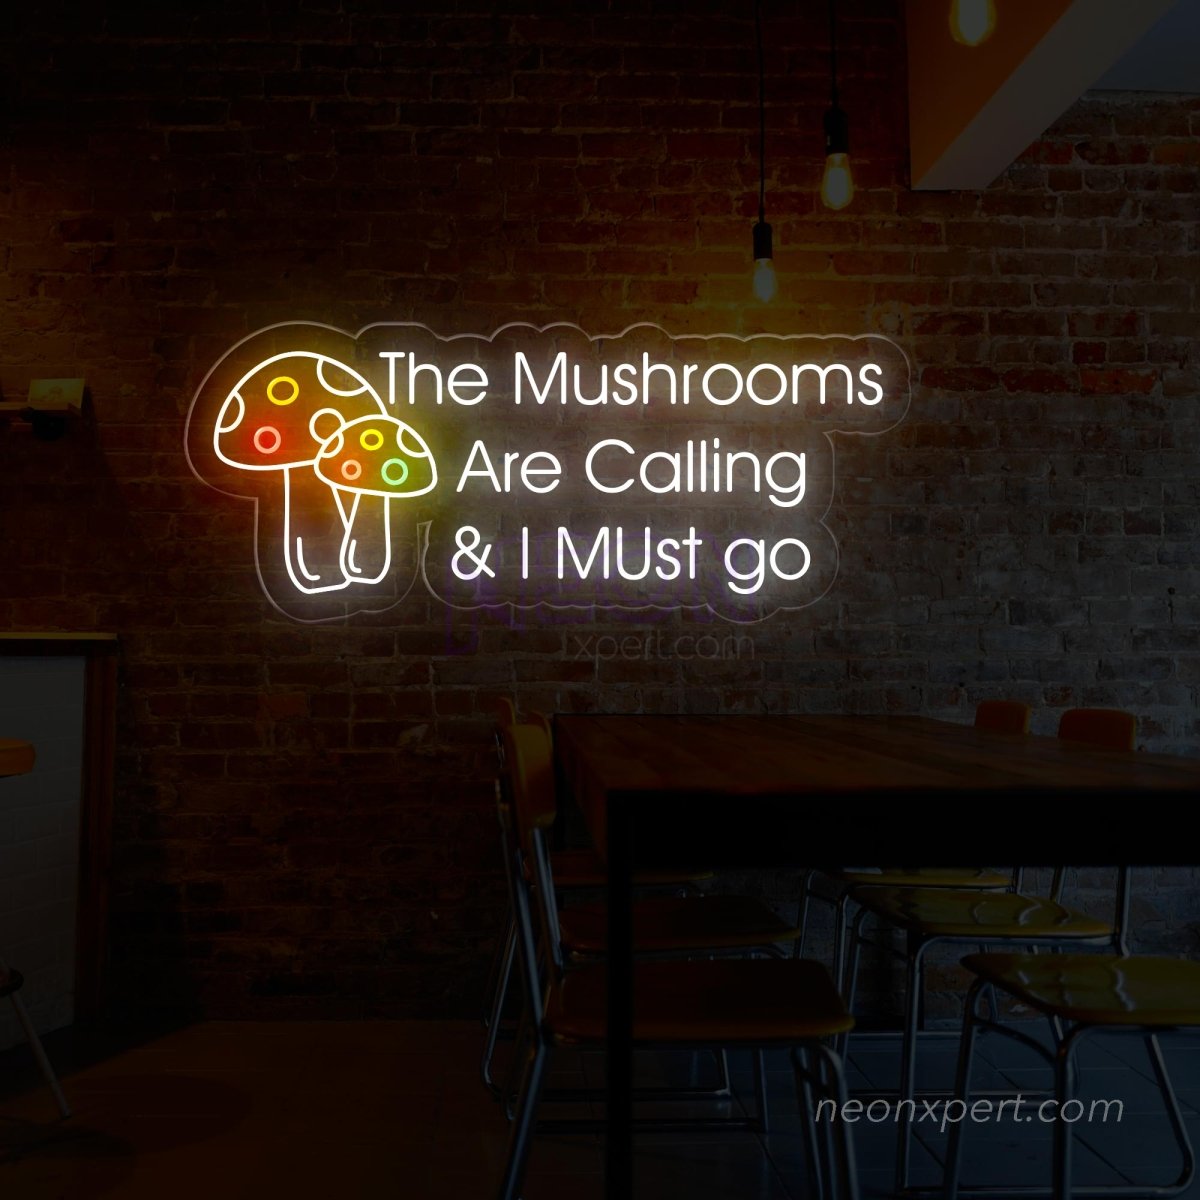 The Mushrooms Are Calling & I Must Go Neon Sign - NeonXpert